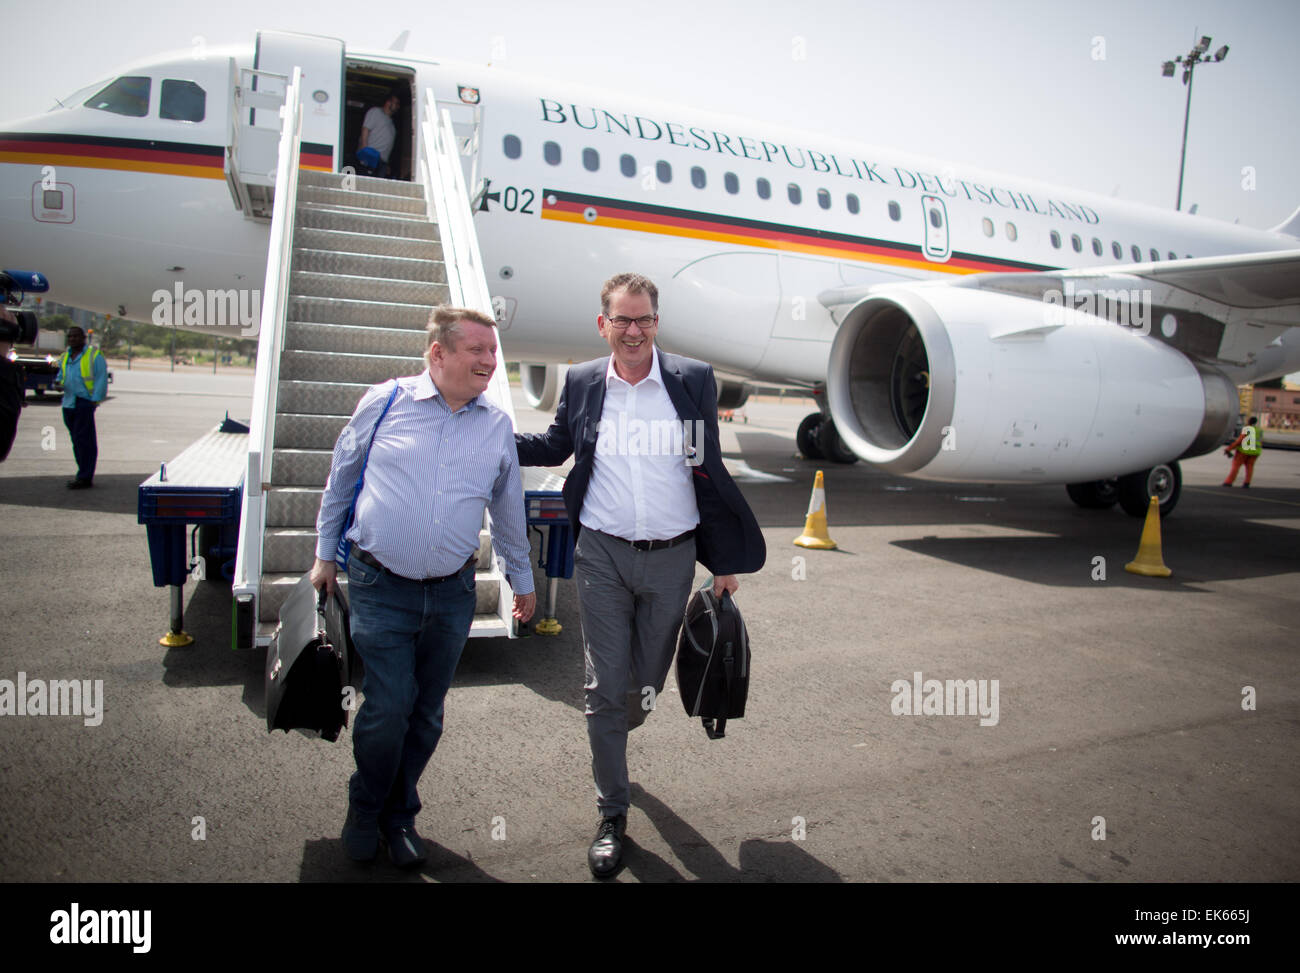 German Minister of Health Hermann Groehe (L) and Minister of Development Gerd Mueller (R) arrive to Kotoka Airport in Accra, Ghana, 07 April 2015. Groehe and Mueller are travelling to Ghana and Liberia to discuss reconstruction after the Ebola epidemic. The first stop is Accra, the capital of Ghana. Ghana remained spared from the Ebola epidemic but serves as a logistical support site for the most affected countries of Liberia, Sierra Leone, and Guinea, . Photo: KAY NIETFELD/dpa Stock Photo